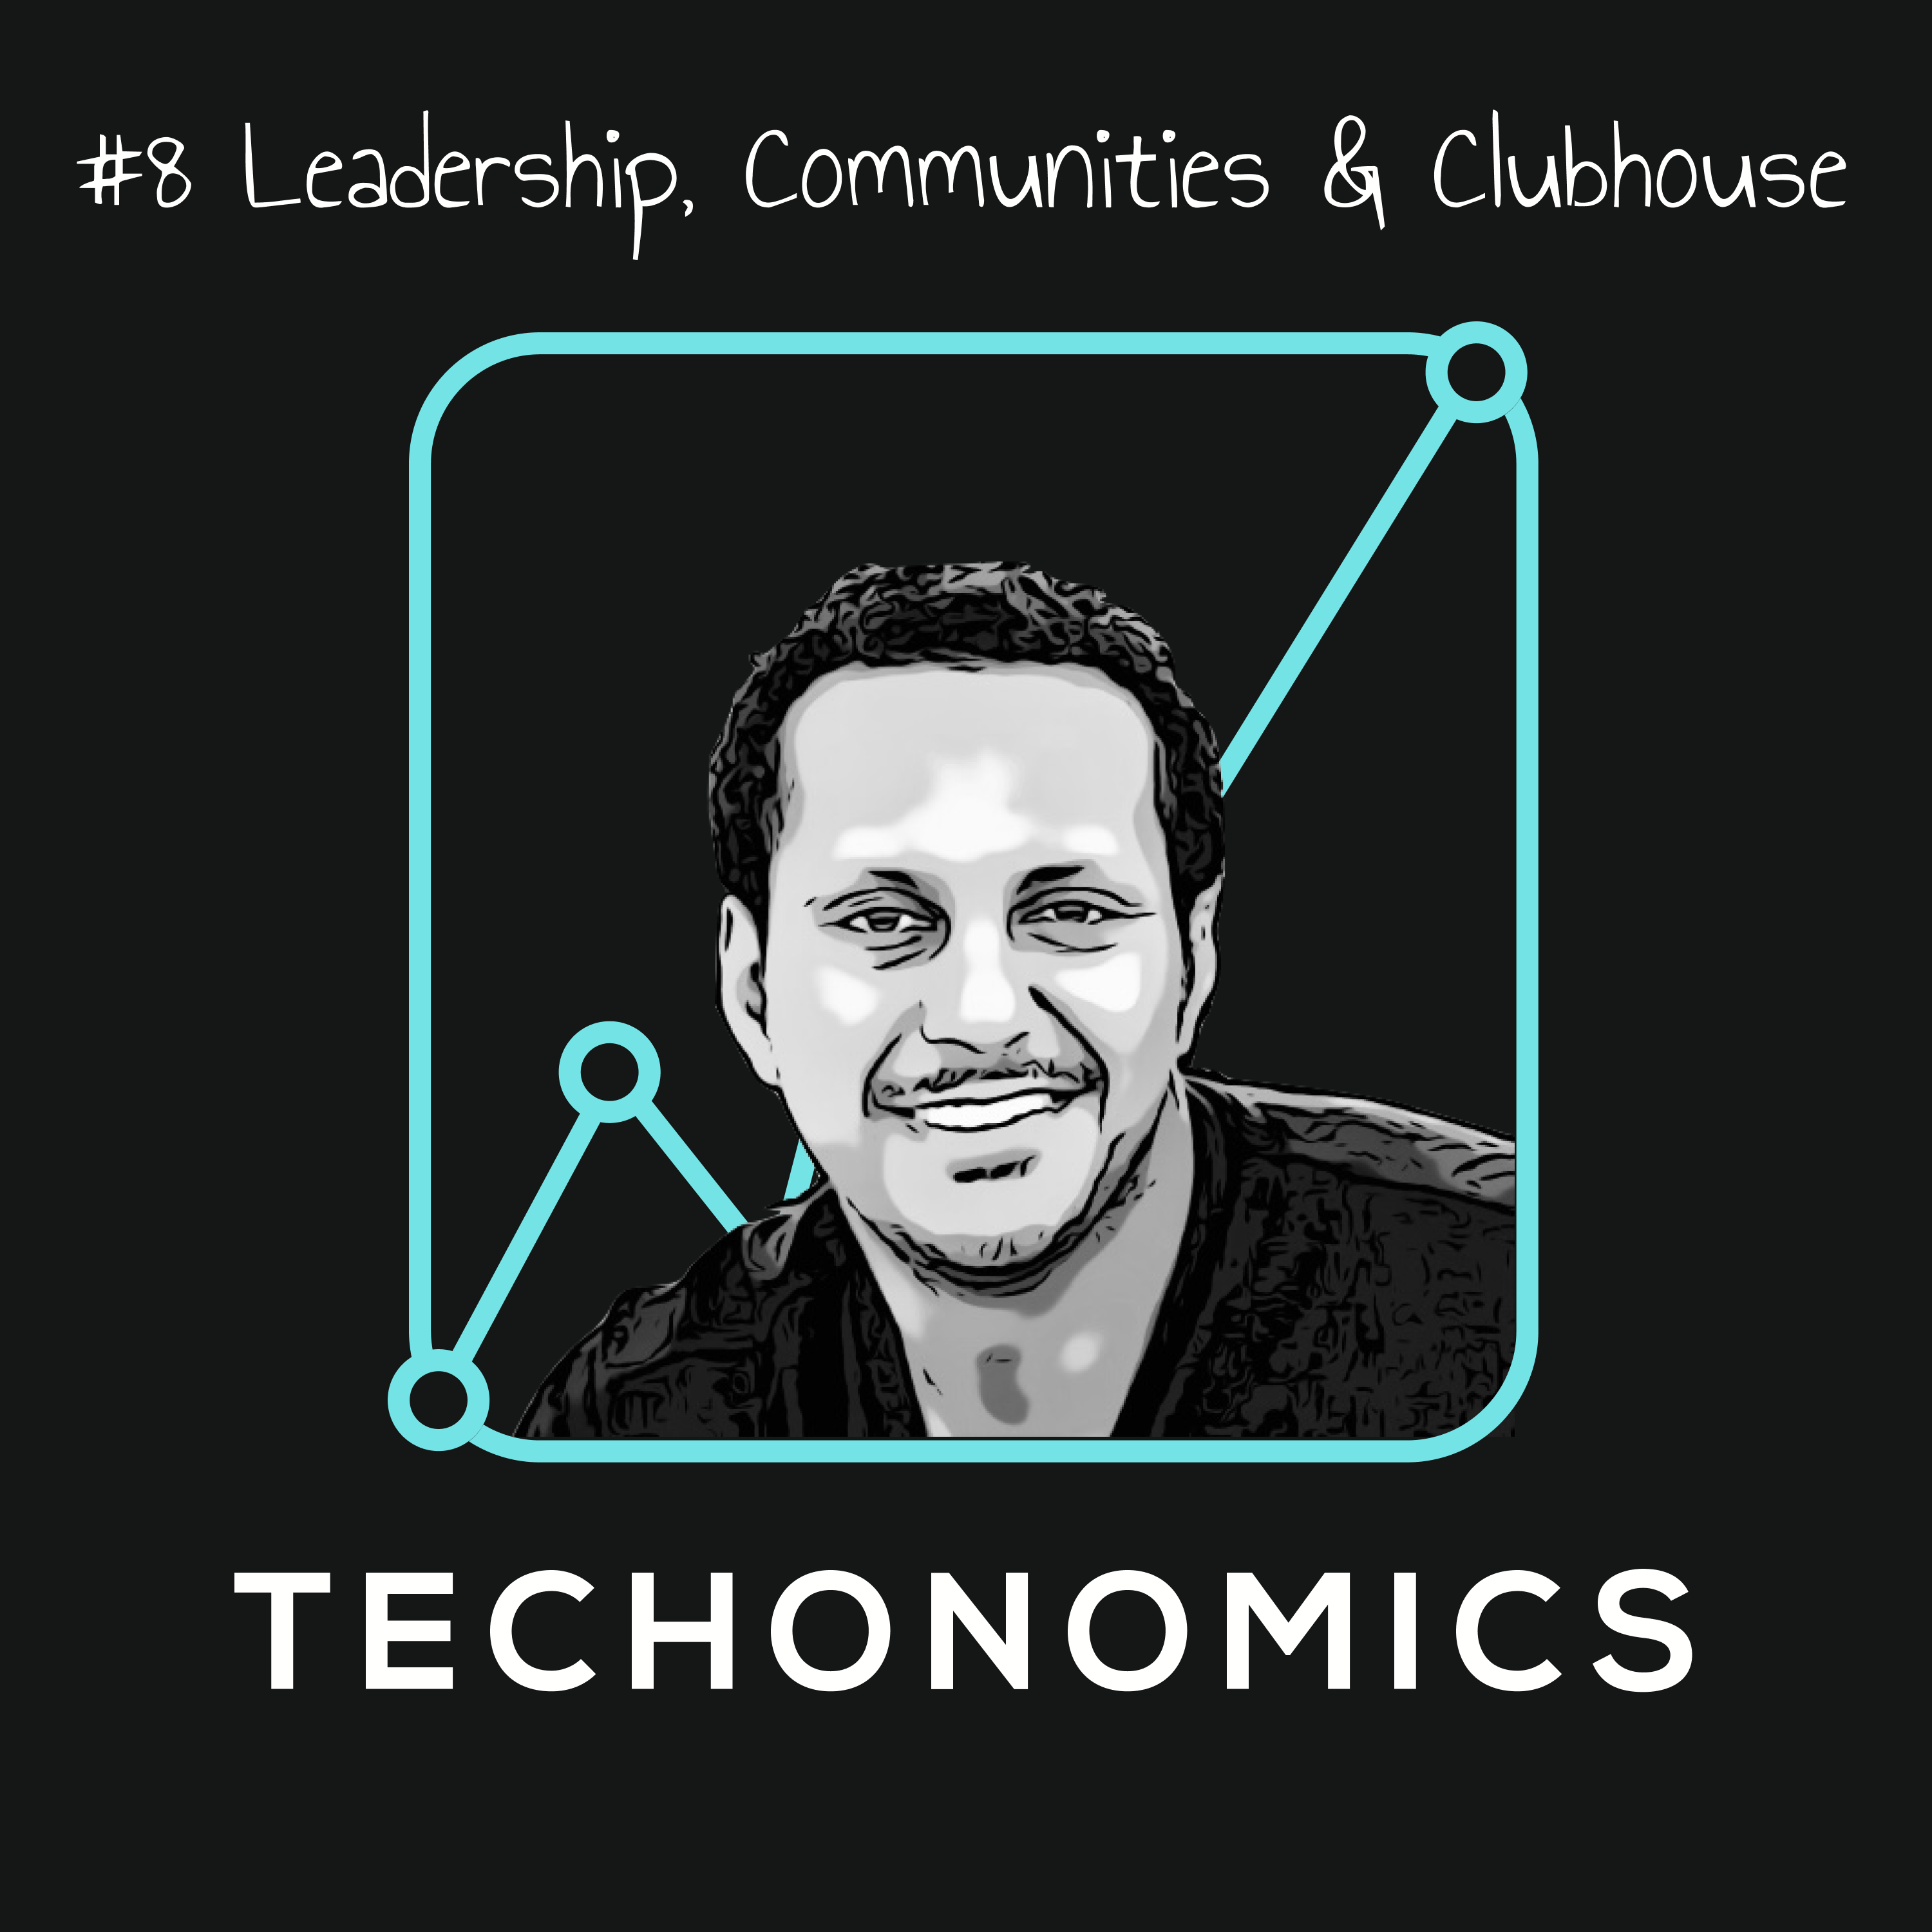 🎙 #8 Leadership, Communities & Clubhouse